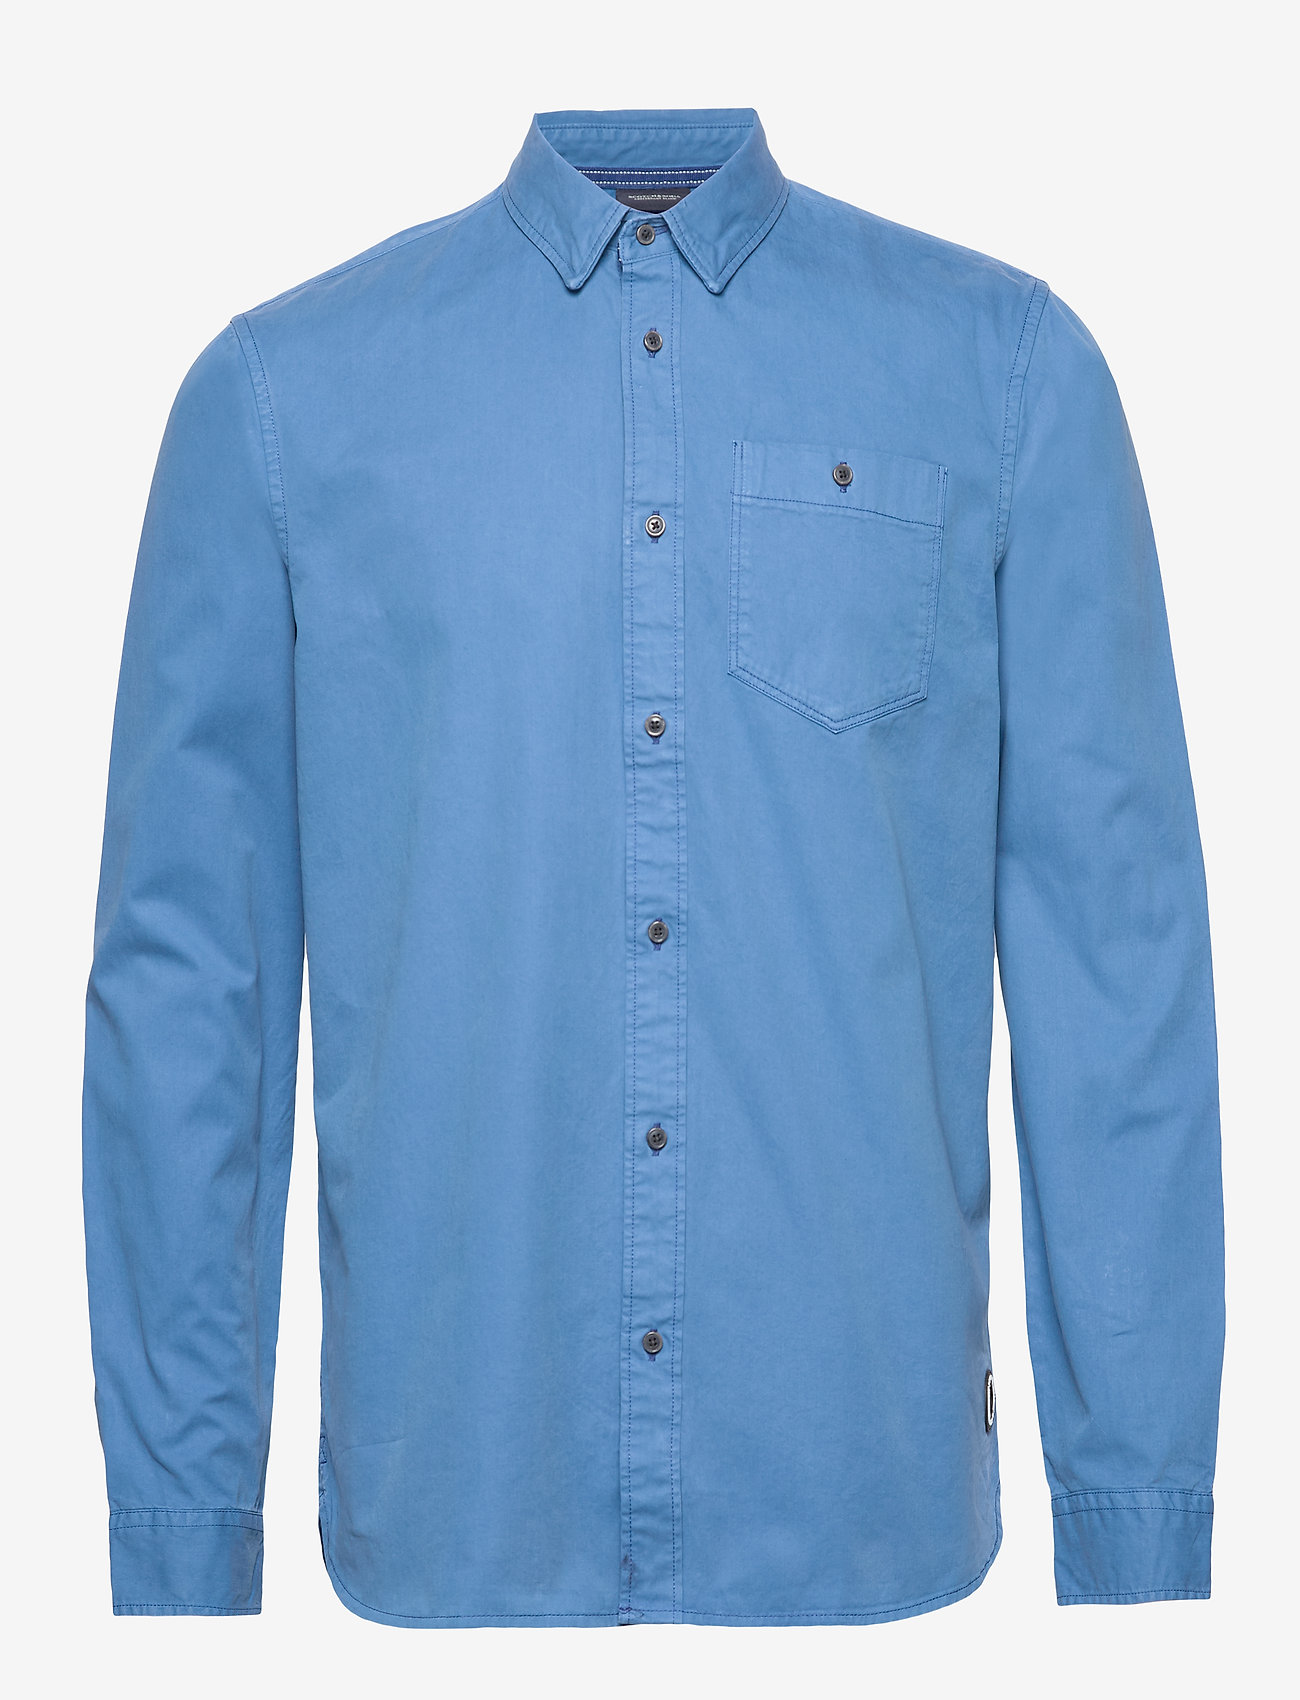 Scotch & Soda Ams Blauw Garment Dyed Shirt With Washes - Casual shirts |